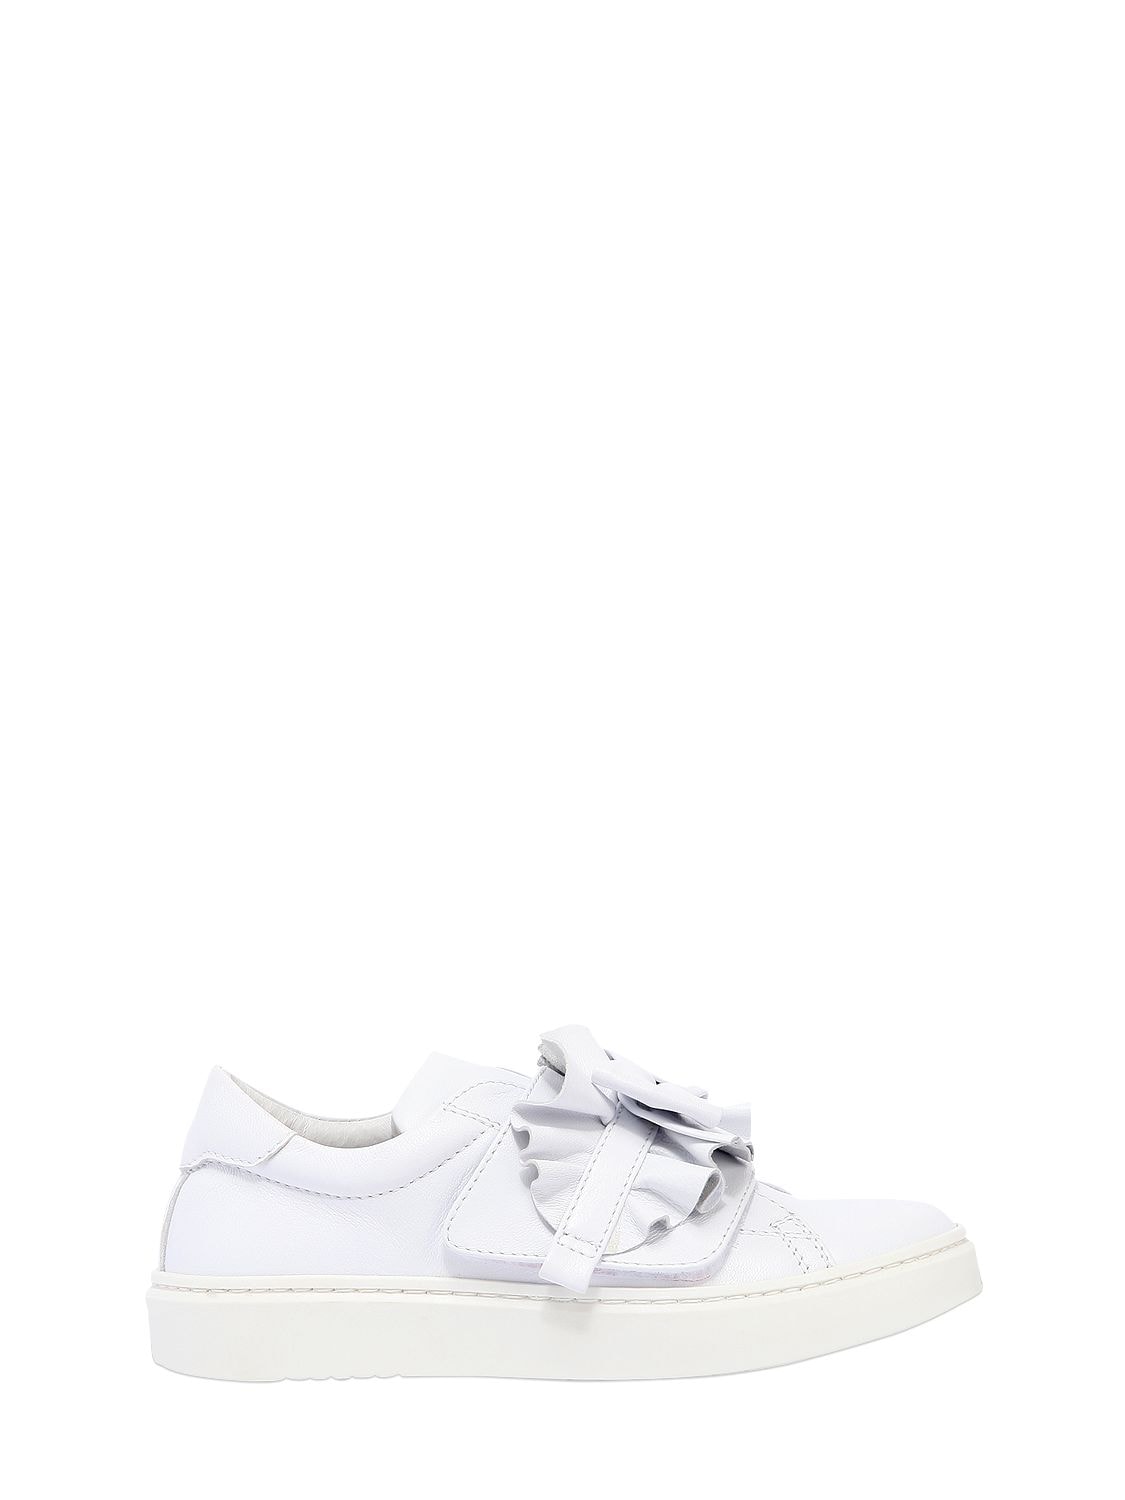 Andrea Montelpare Kids' Leather Slip-on Sneakers W/ Bow Detail In White